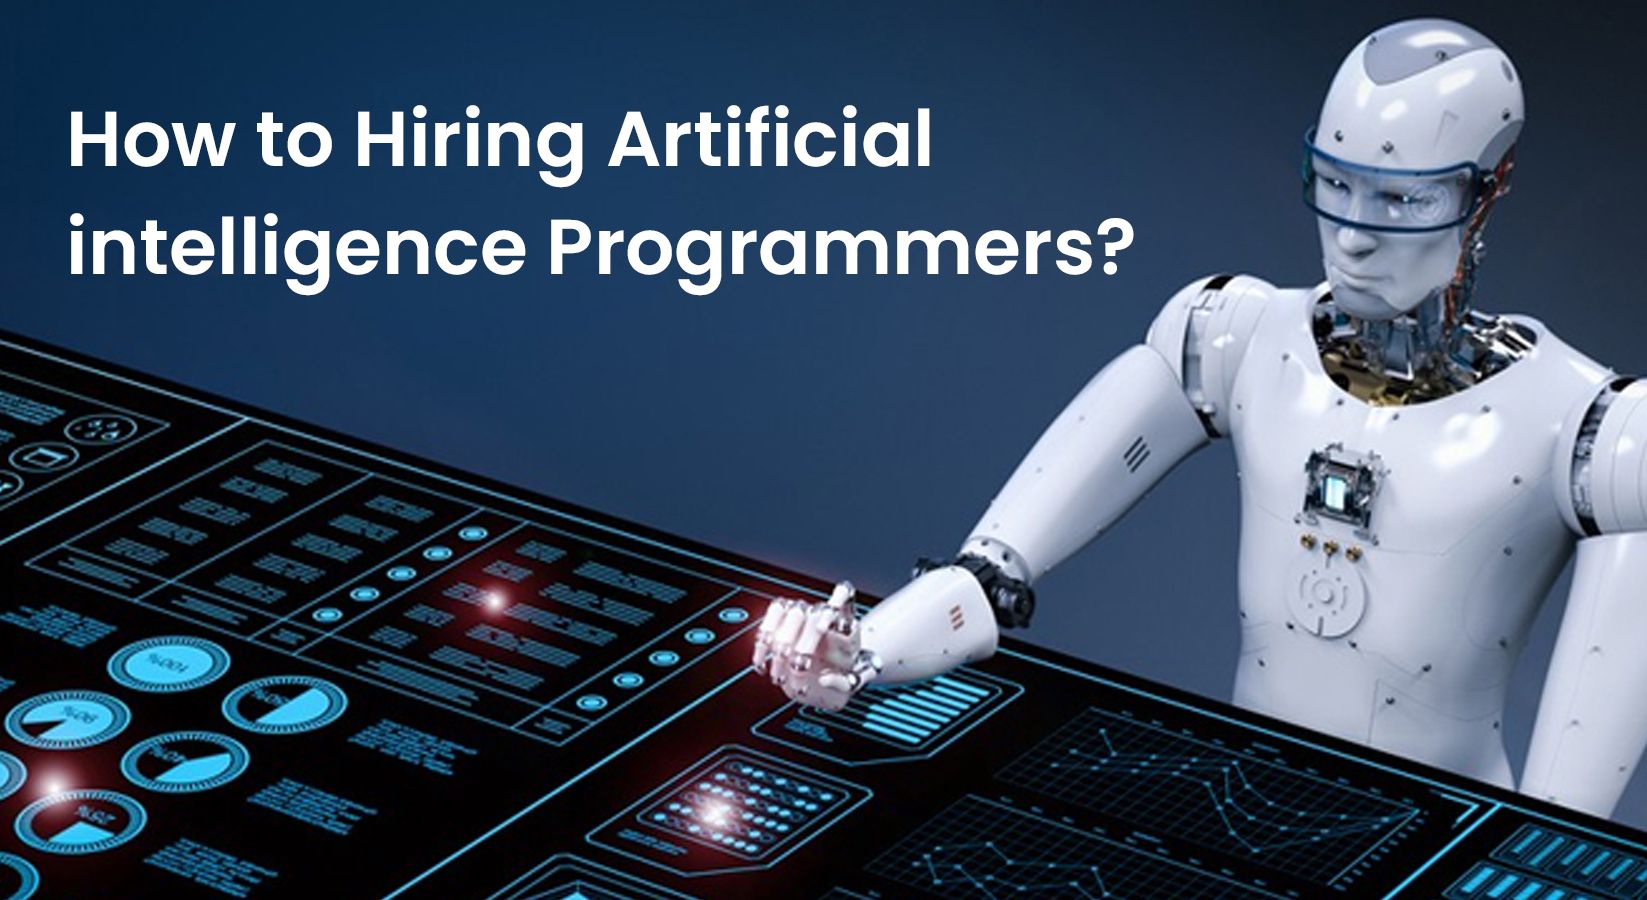 How to Hiring Artificial intelligence Programmers?